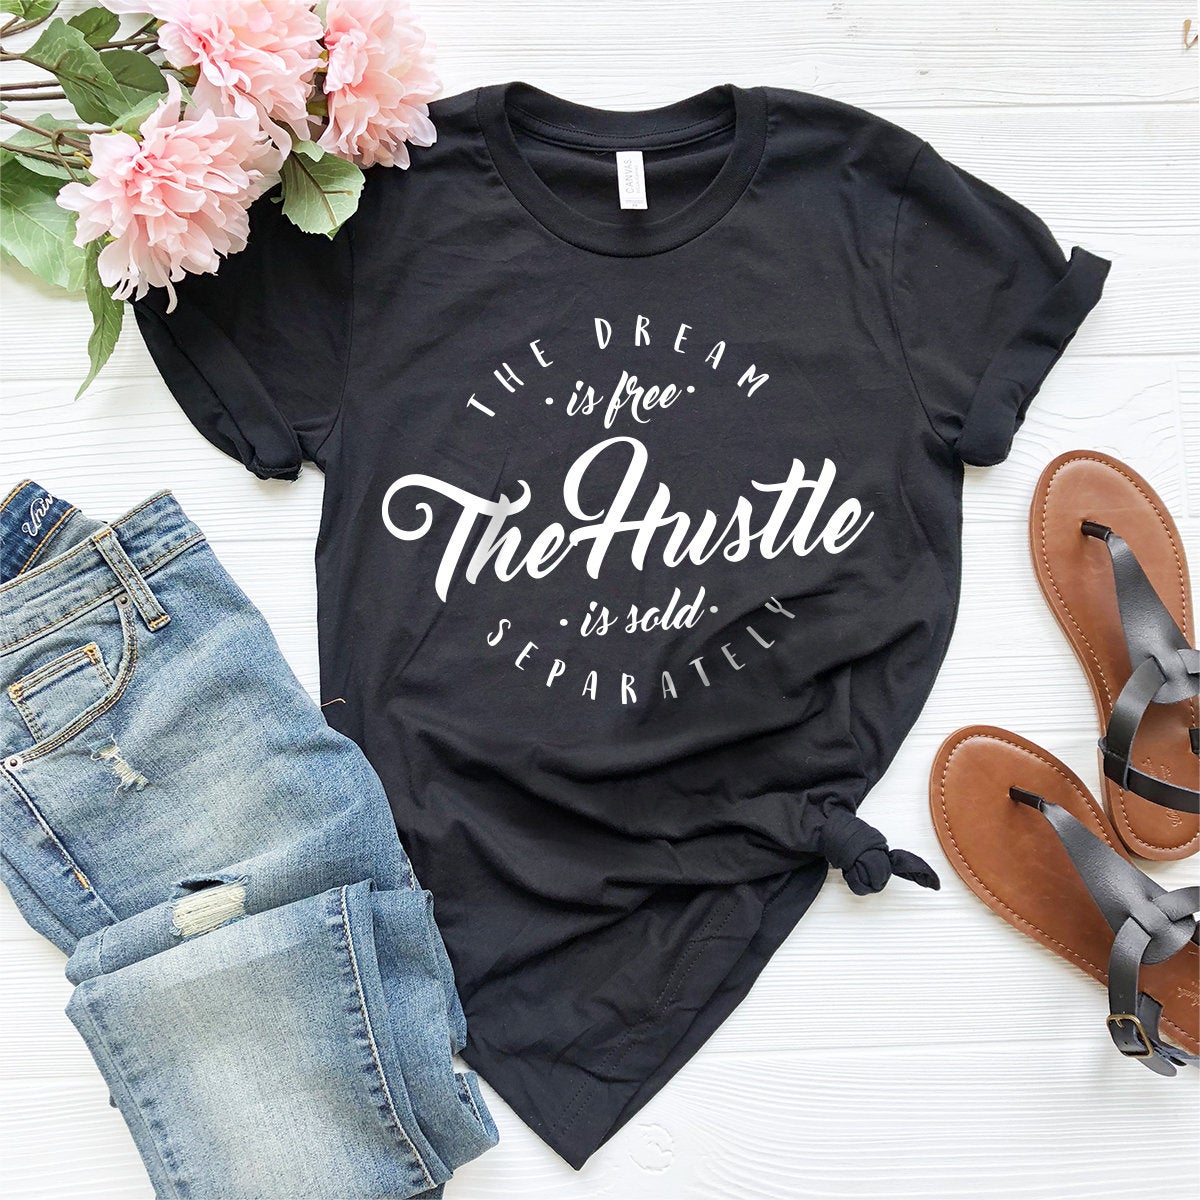 The Dream Is Free The Hustle Is Sold Separately T-Shirt, Girl Boss Shirt, Empowered Women Shirt, Inspirational Quote Shirt, Motivational Tee - Fastdeliverytees.com